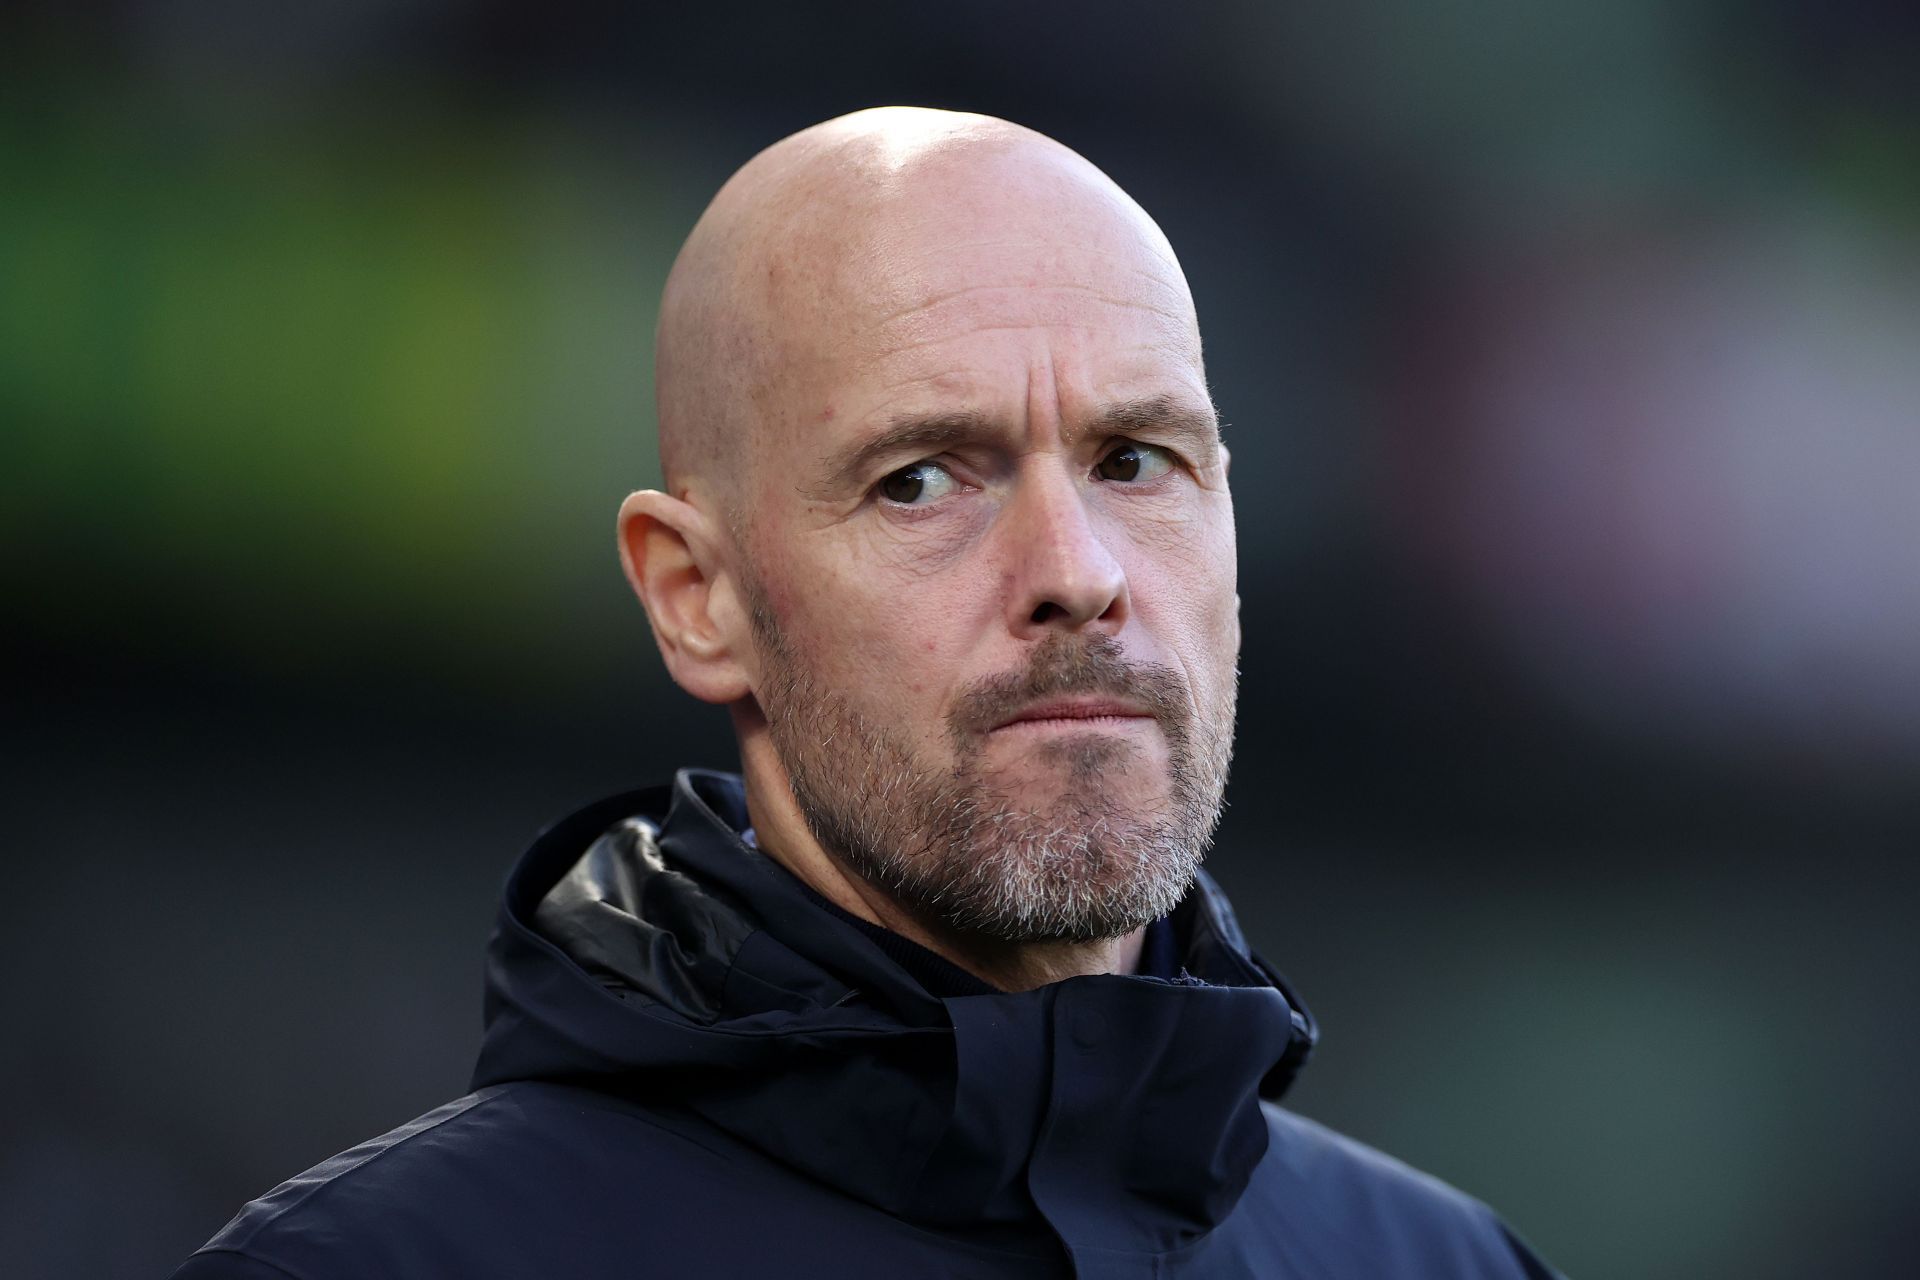 Erik ten Hag gives his take on the incident.